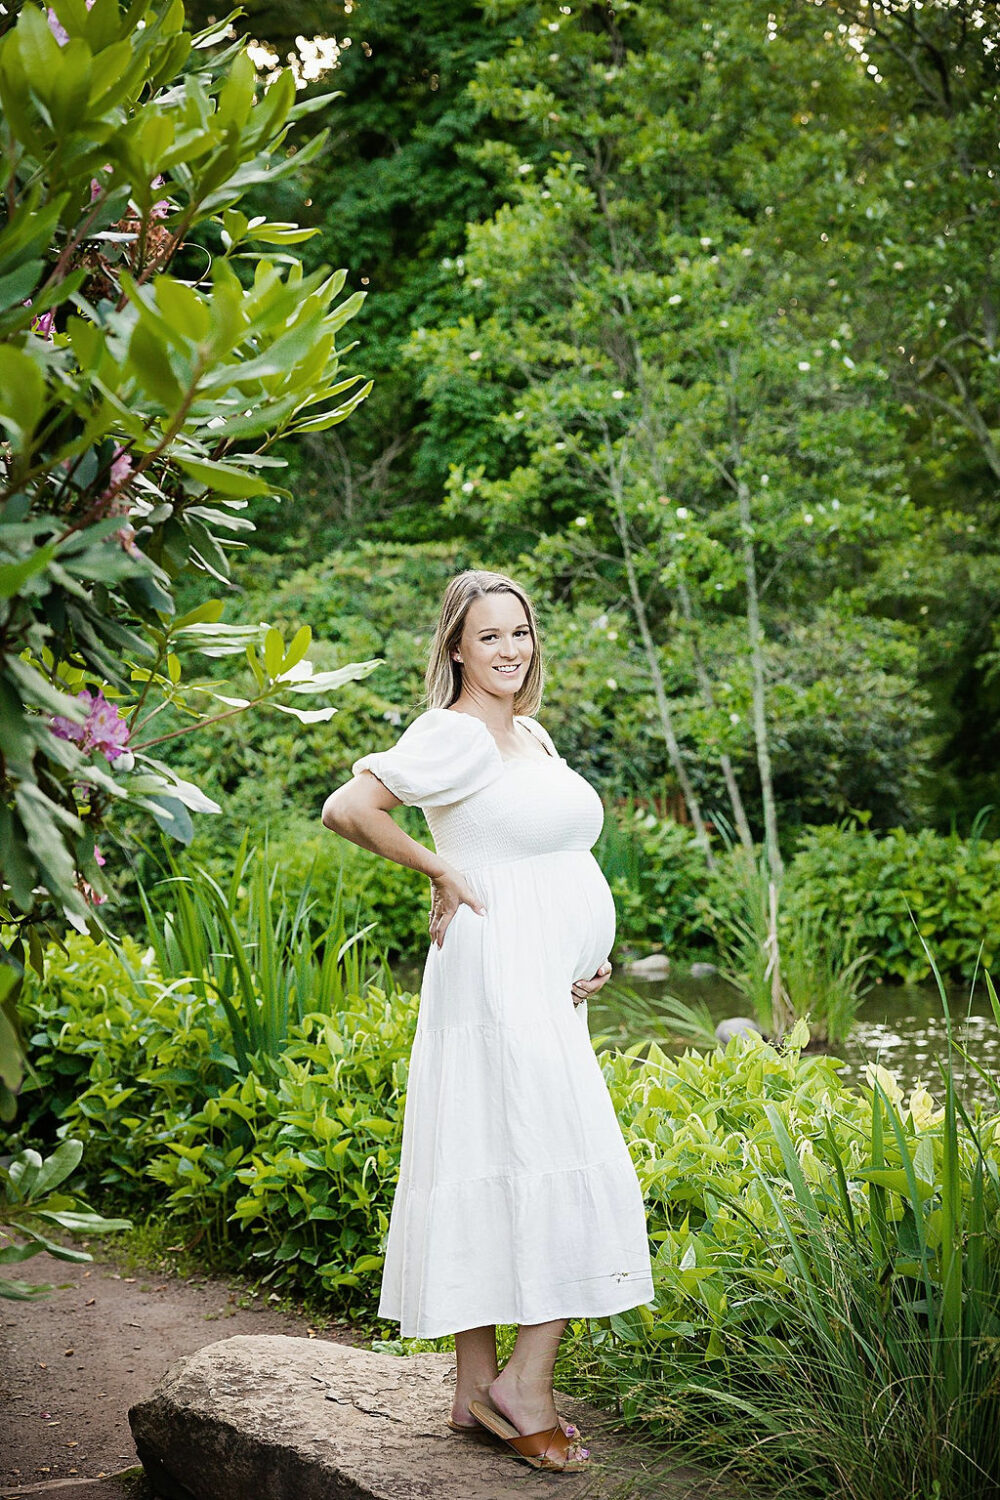 Pregnant woman smiling at camera doing maternity photo shoot poses for her maternity session in Millstone, New Jersey.